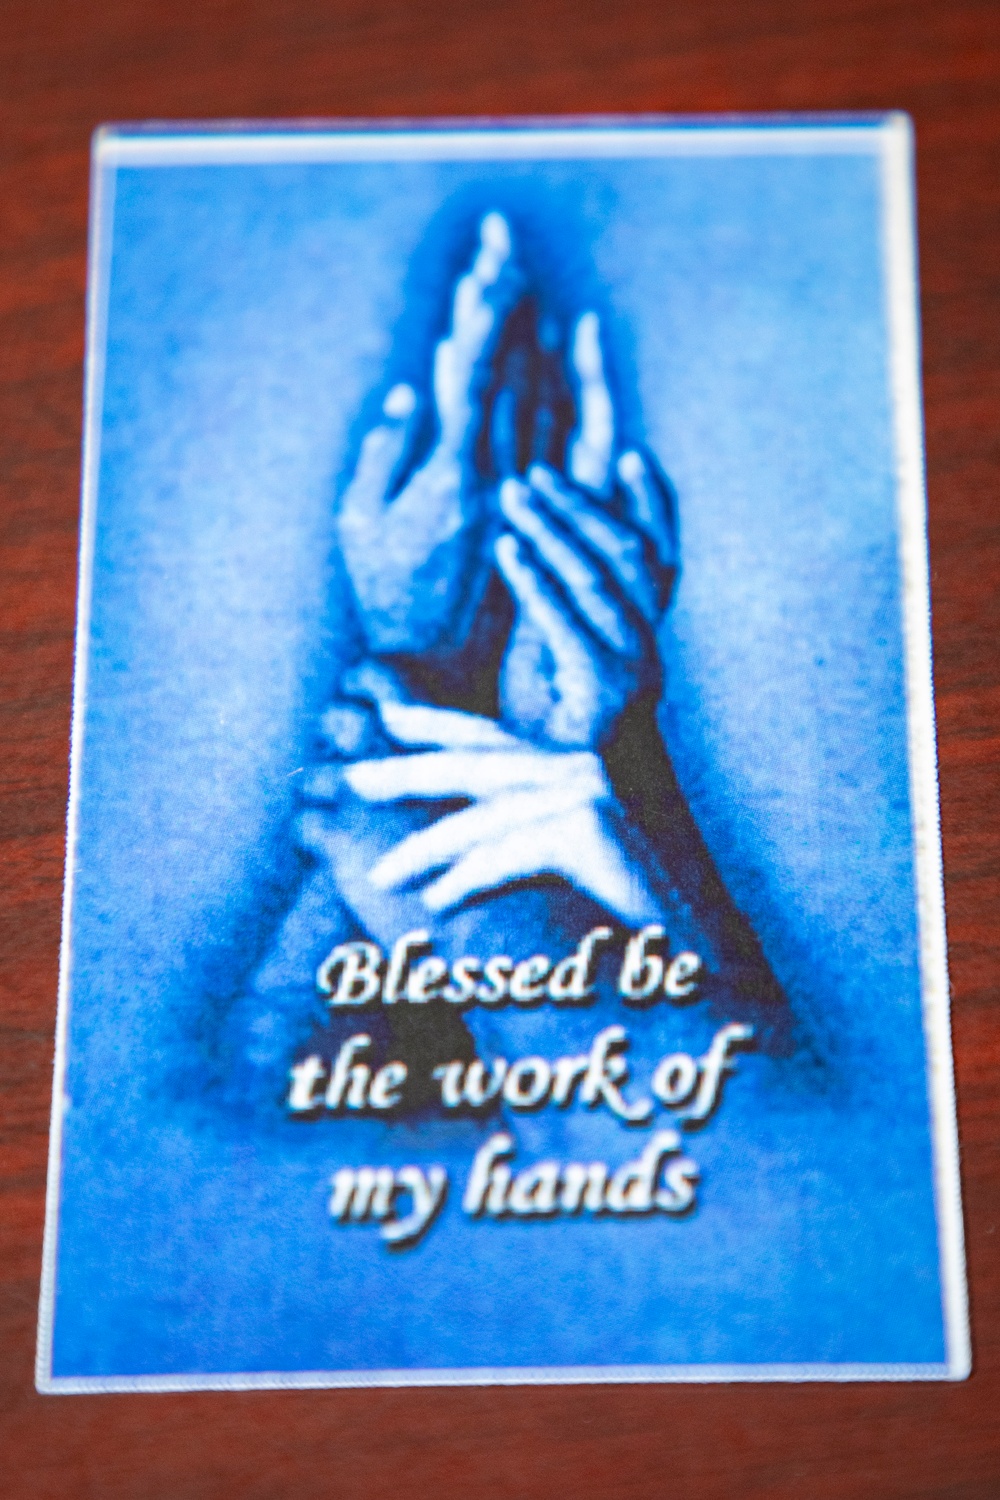 NMFL Observes Blessing of the Hands